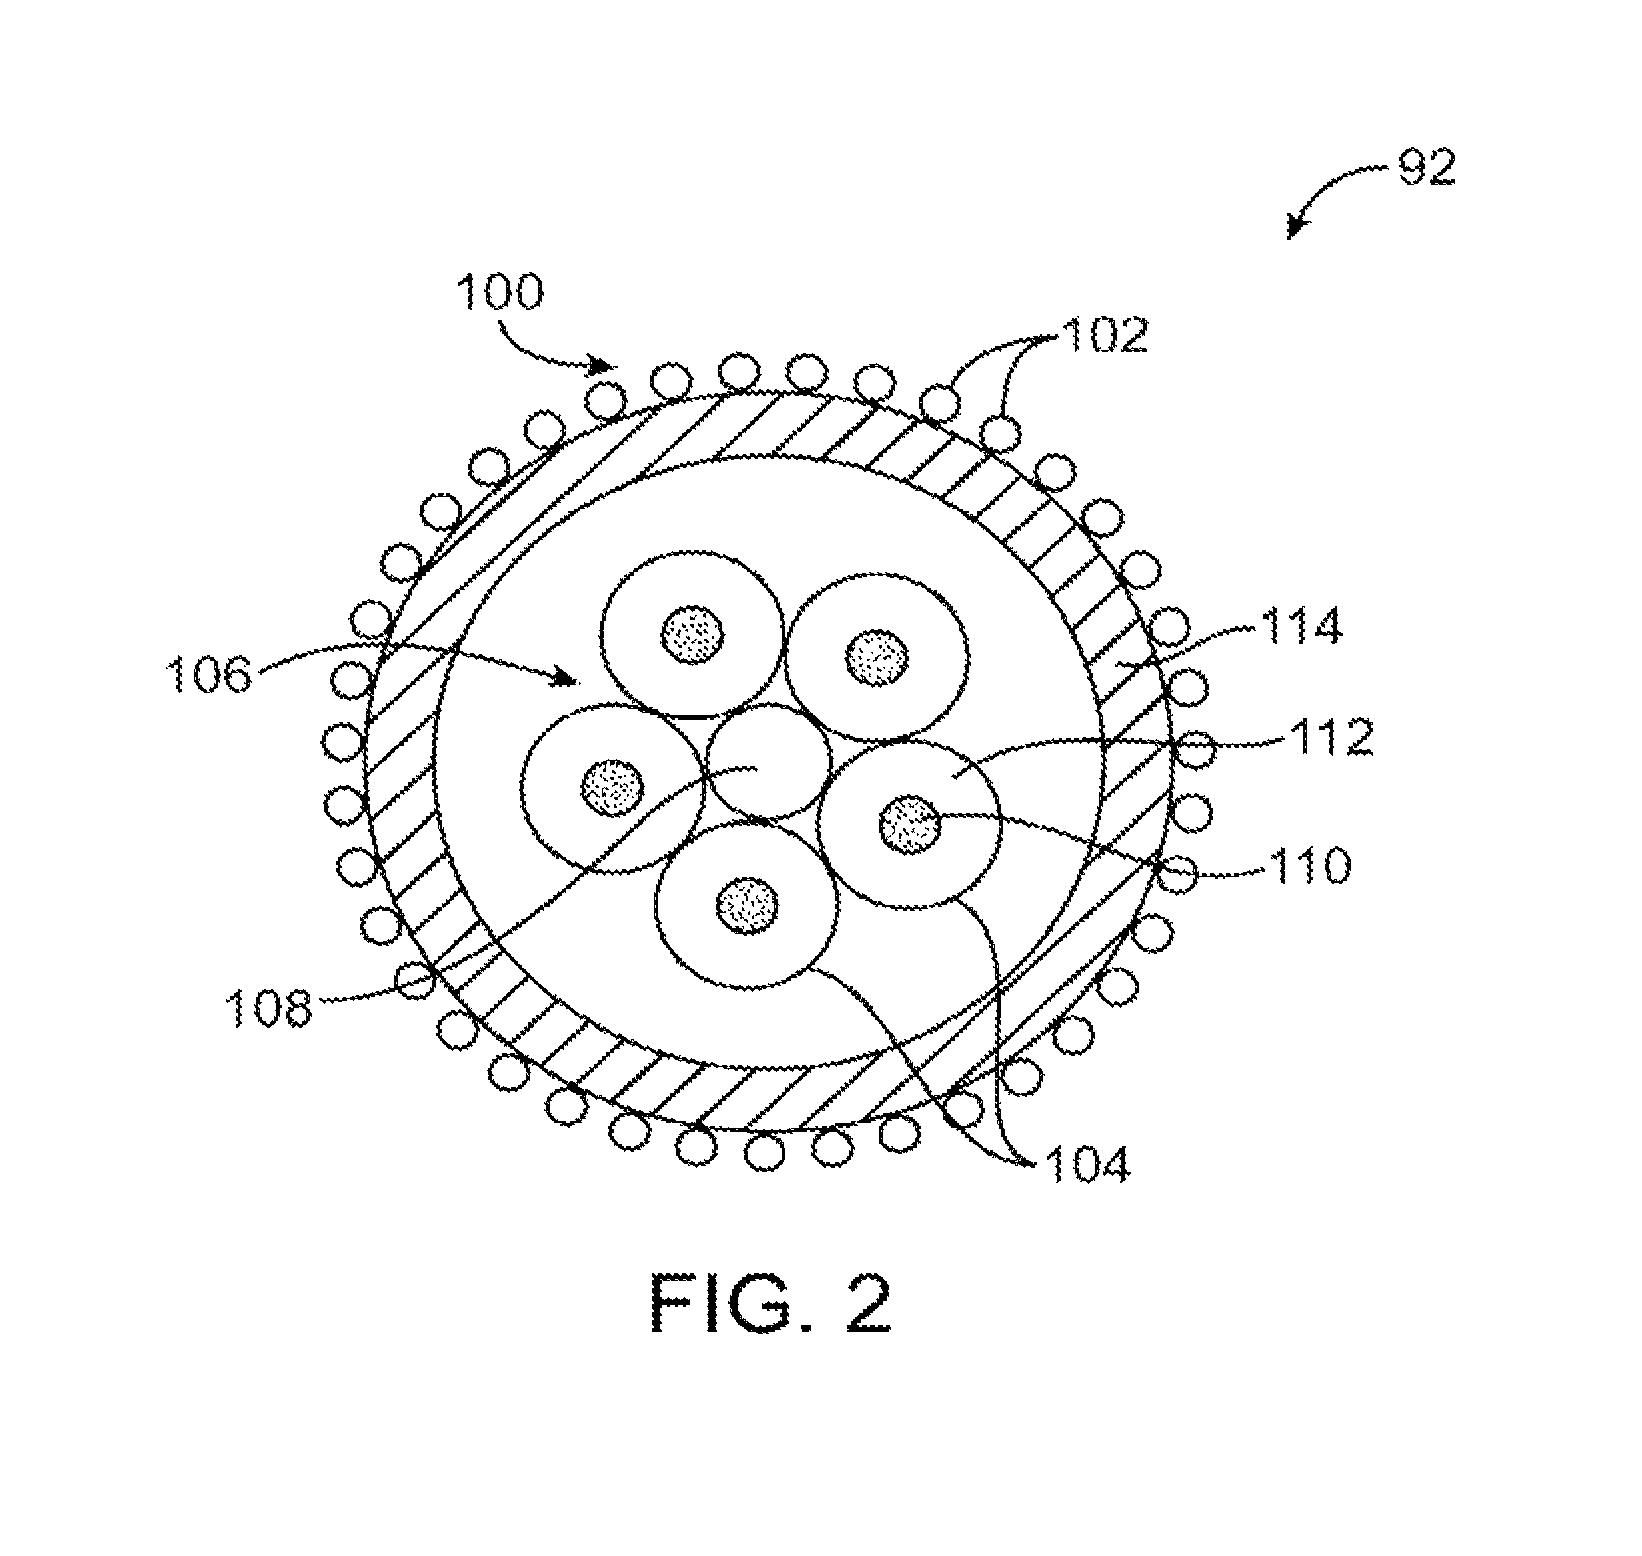 Cables with intertwined strain relief and bifurcation structures